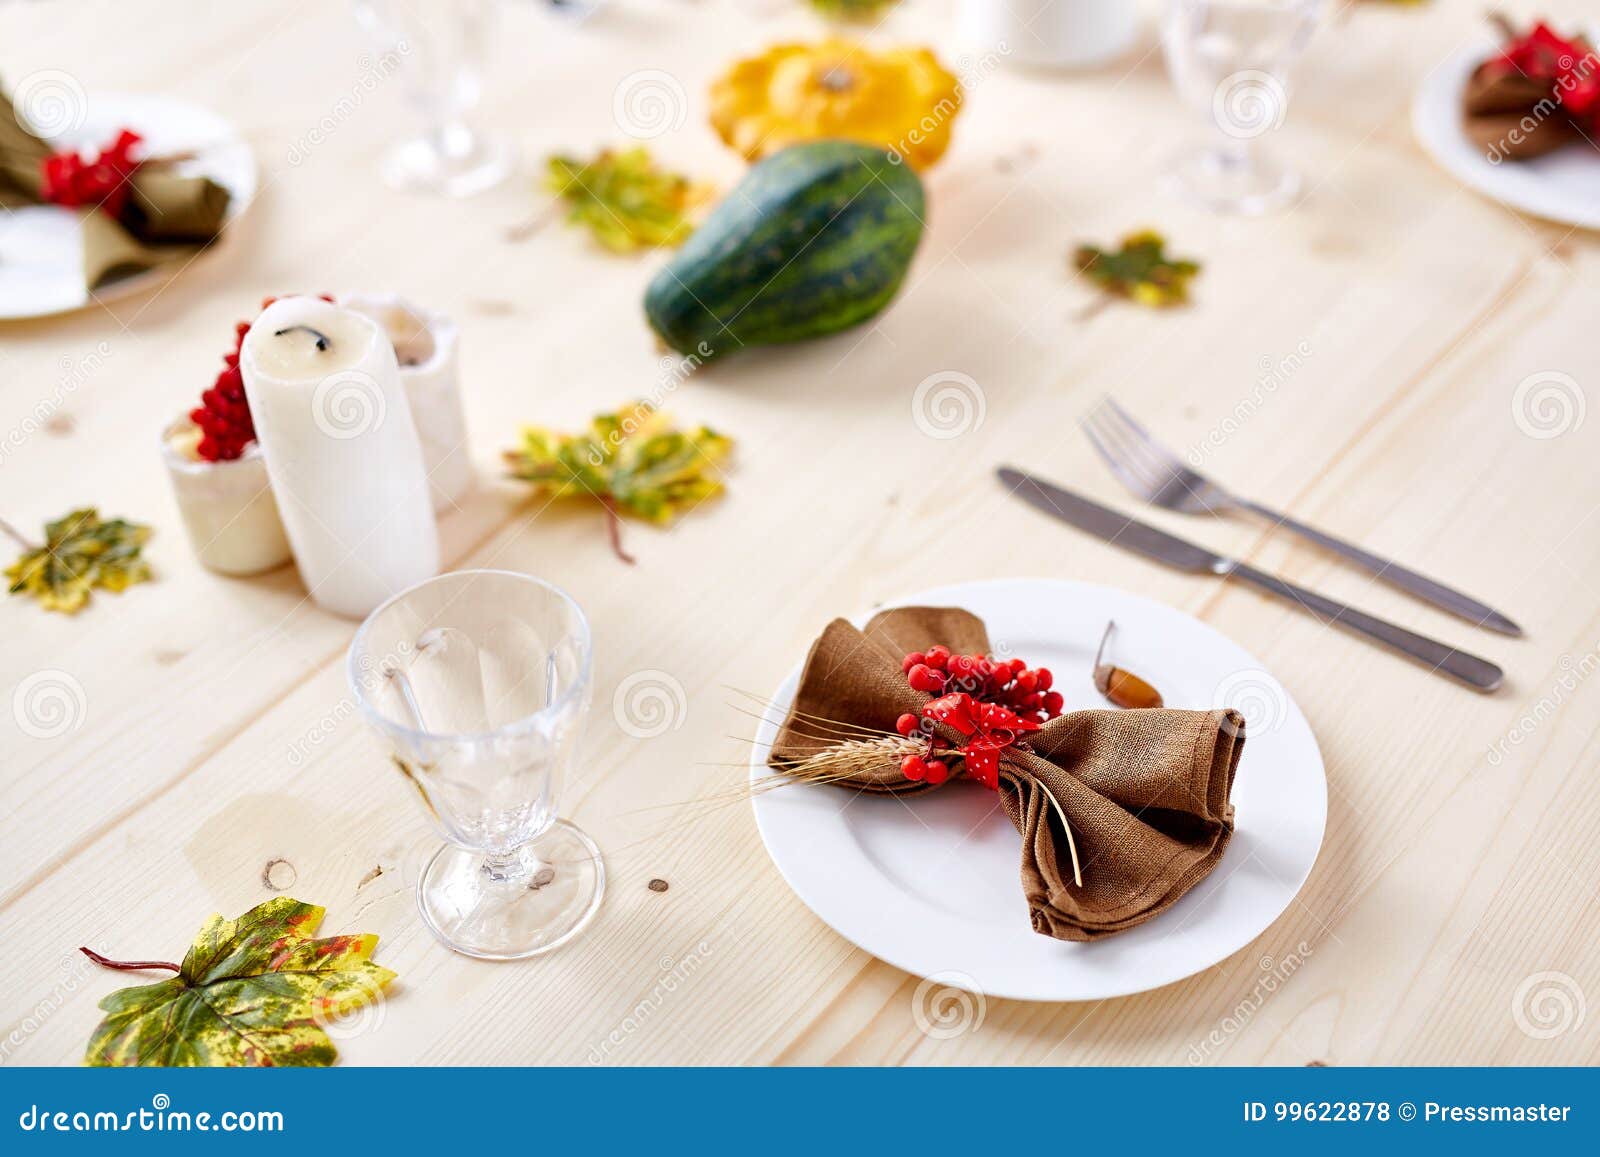 Part of feast stock photo. Image of knife, candle, fork - 99622878